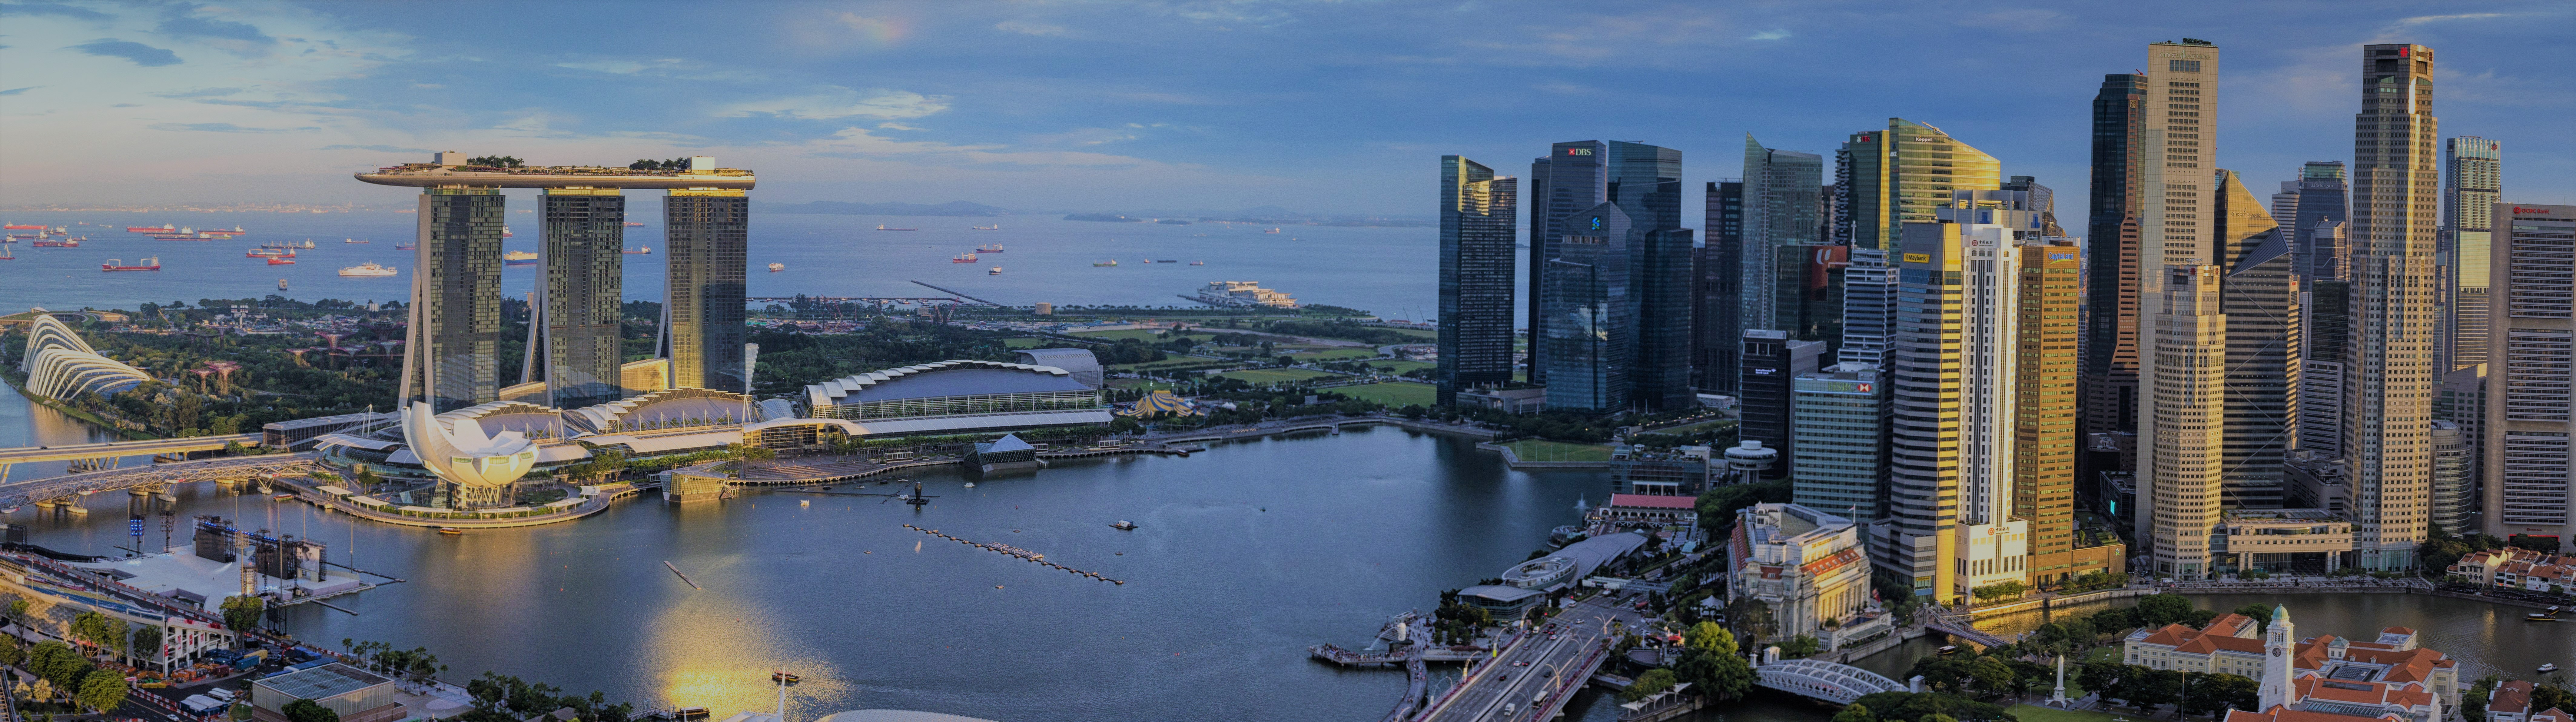 Management Training Courses in Singapore City, Marina Bay Financial District, , Singapore